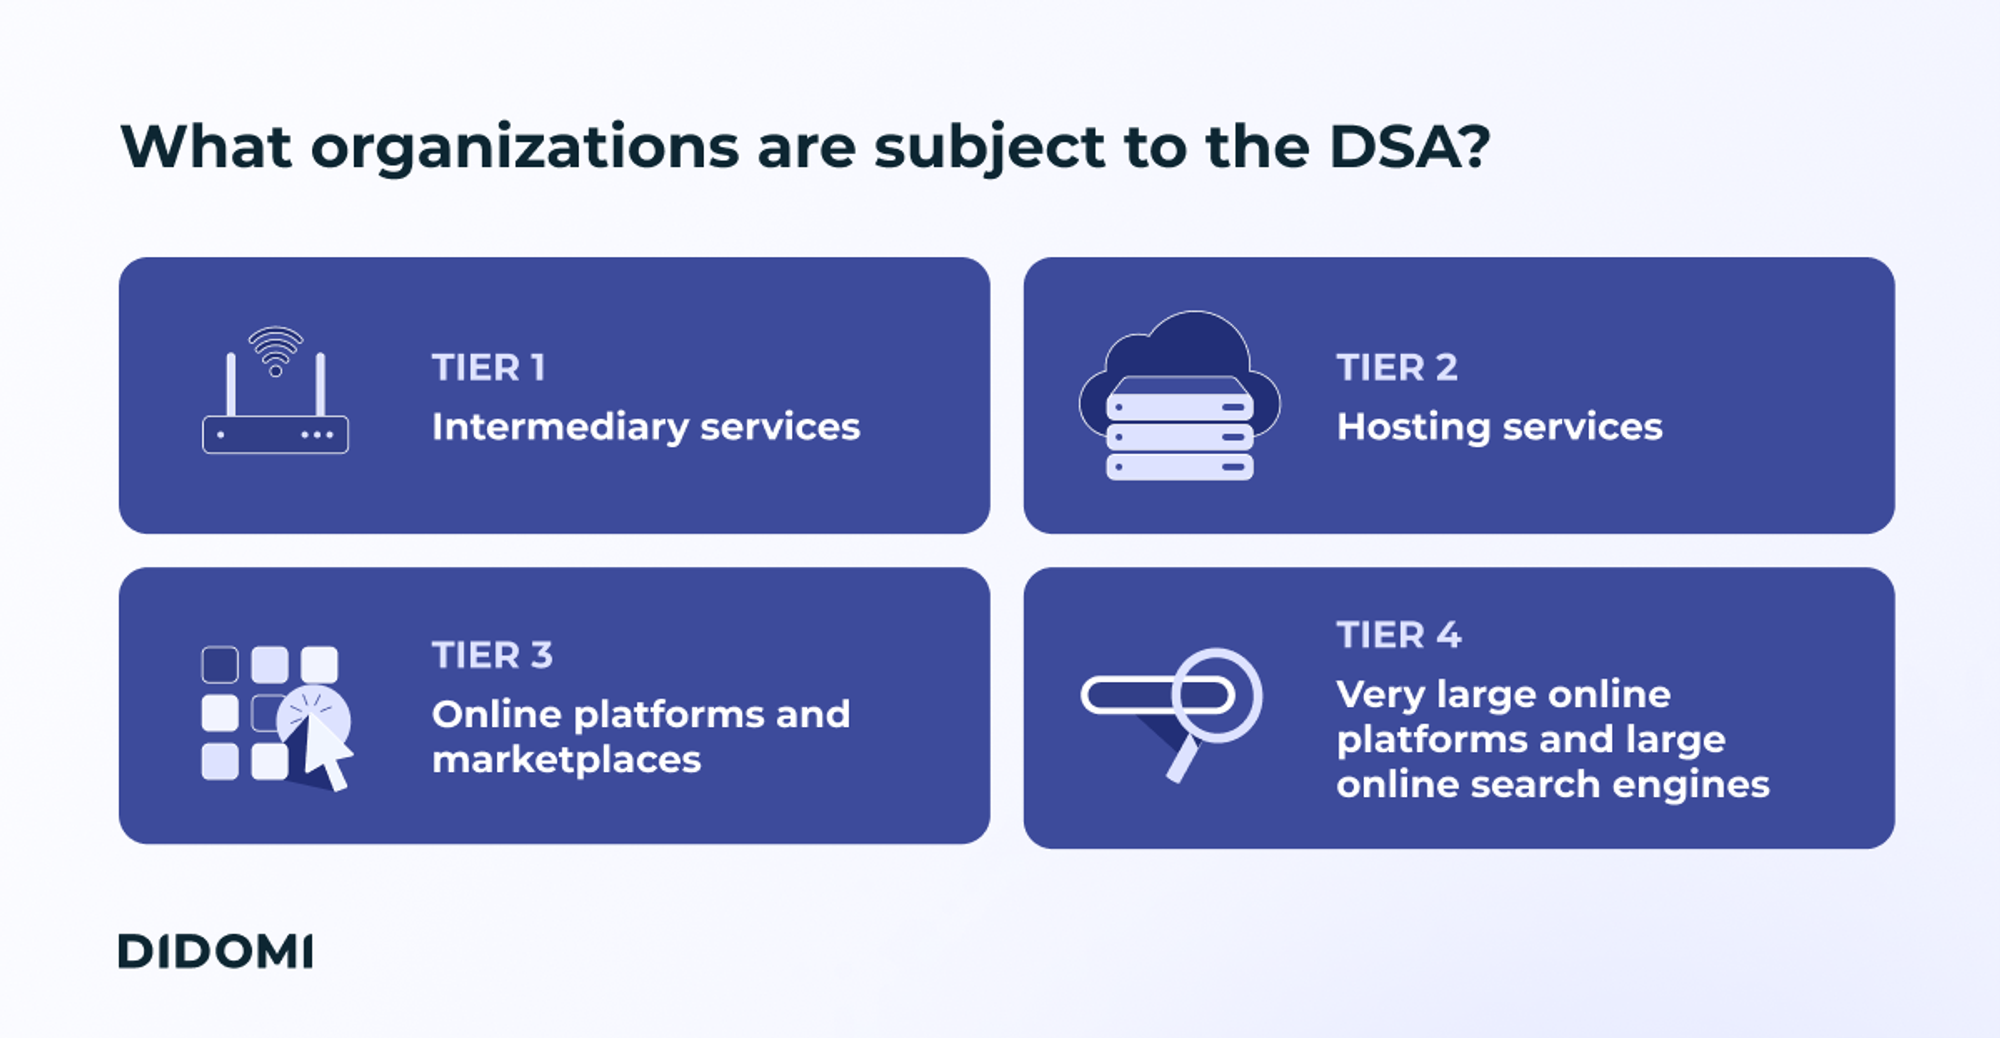 The title of the image "What organizations are subject to the DSA?" stands over 4 squares, each outlining a different type of organizations ranked in tiers: Tier 1: Intermediary services  Tier 2: Hosting services Tier 3: Online platforms and marketplaces Tier 4: Very large online platforms and large online search engines